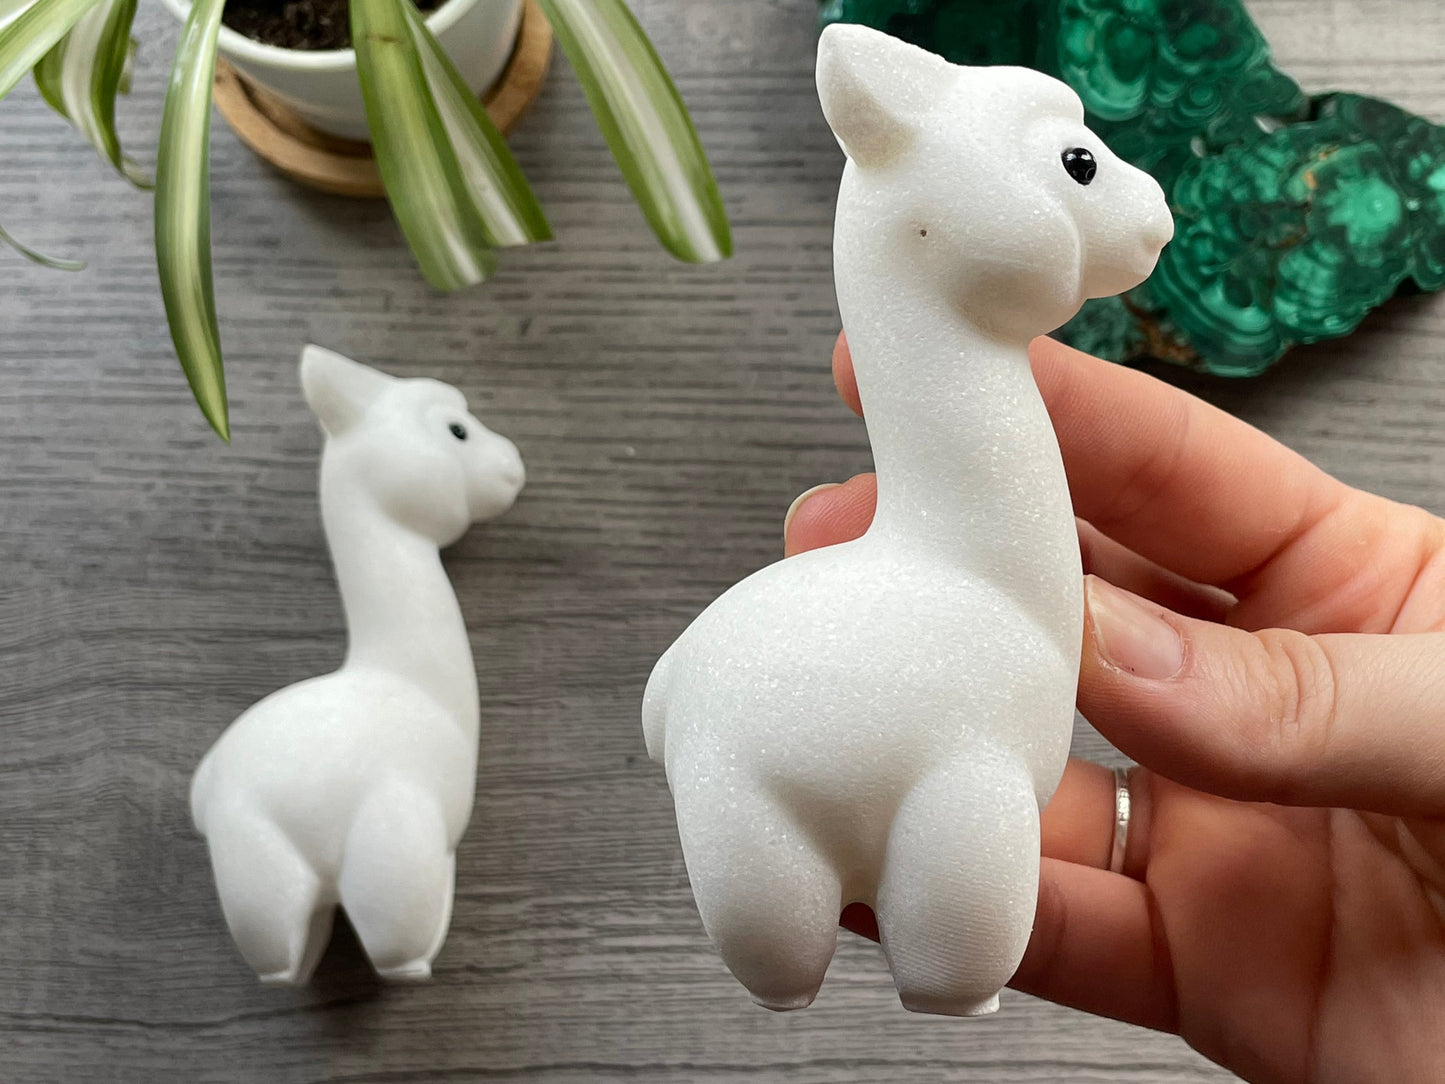 Pictured is an alpaca or llama carved out of white marble.